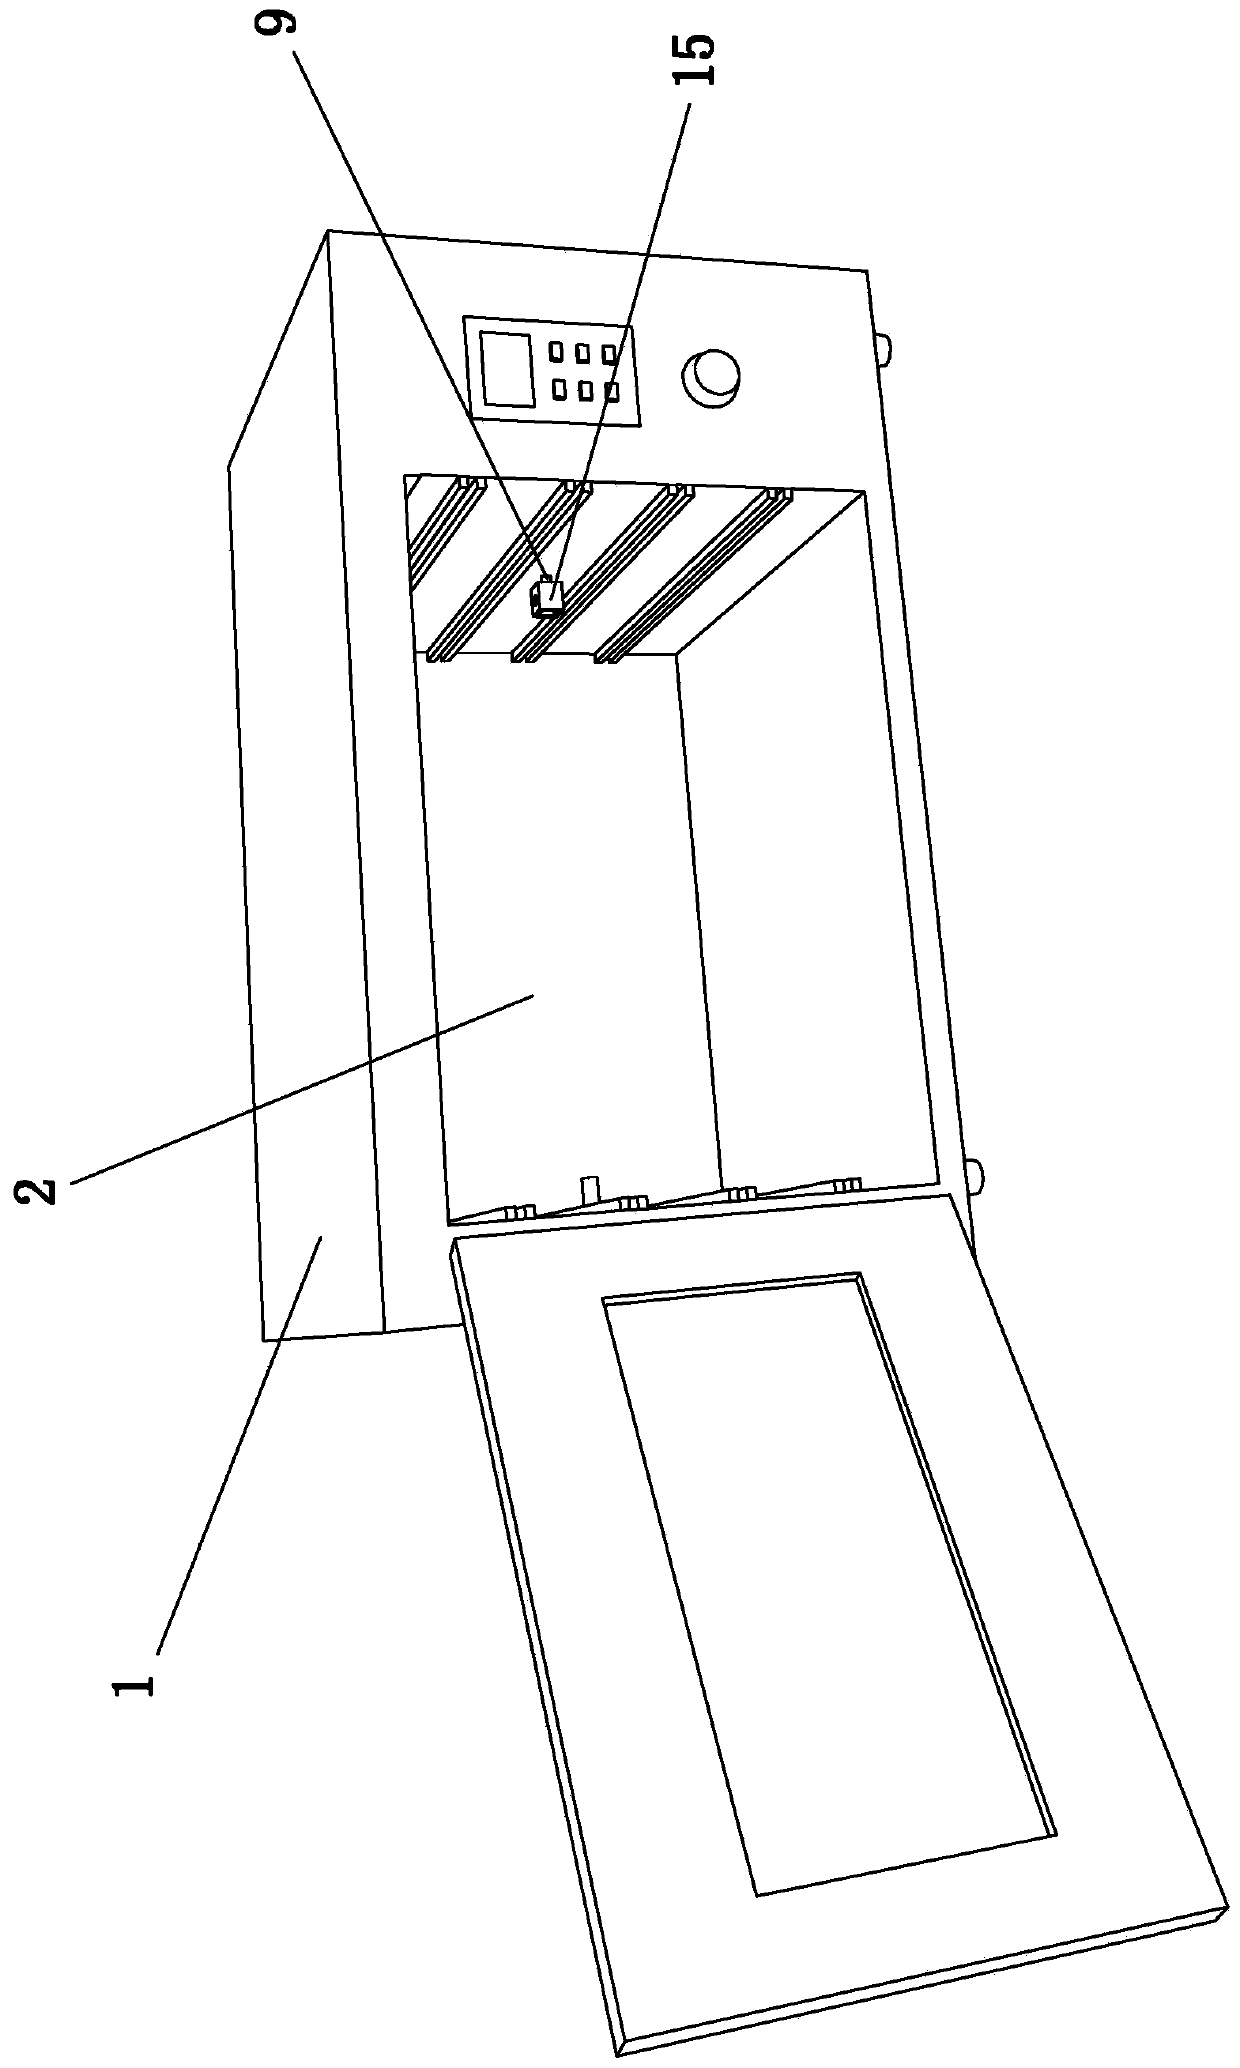 Steaming oven with rotary grill and using method of rotary grill